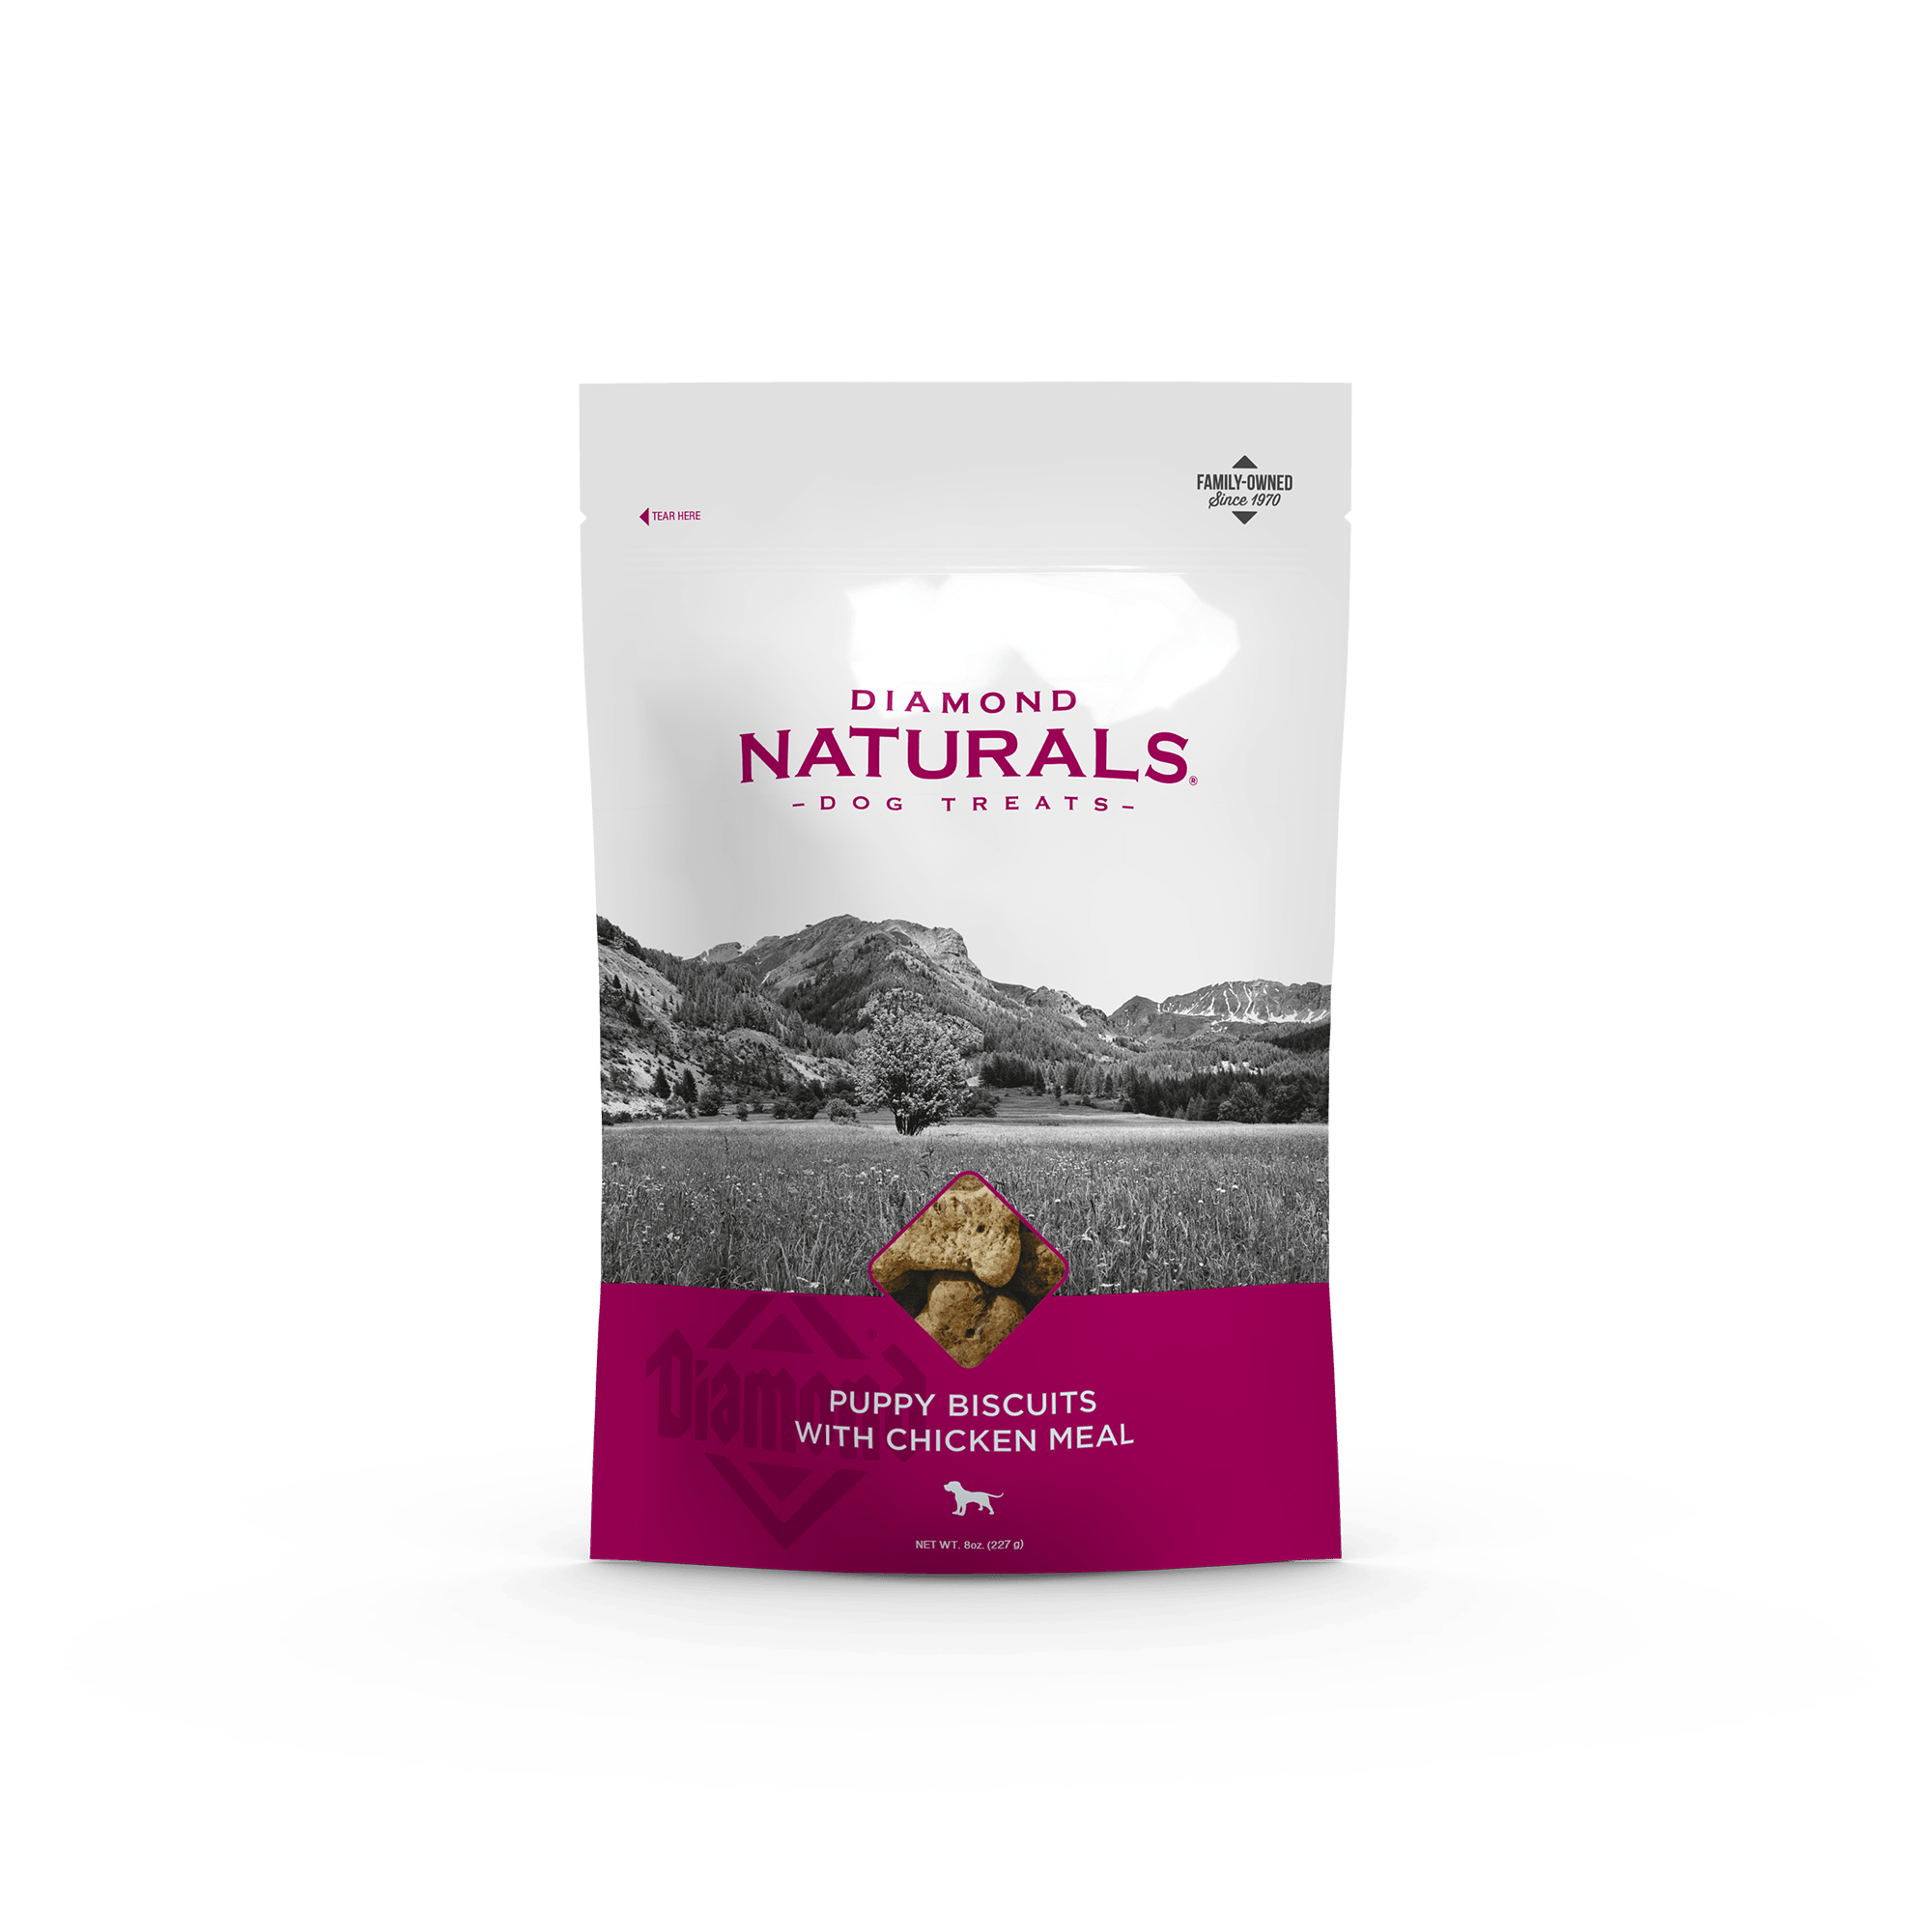 Diamond Naturals Puppy Biscuits with Chicken Meal product packaging